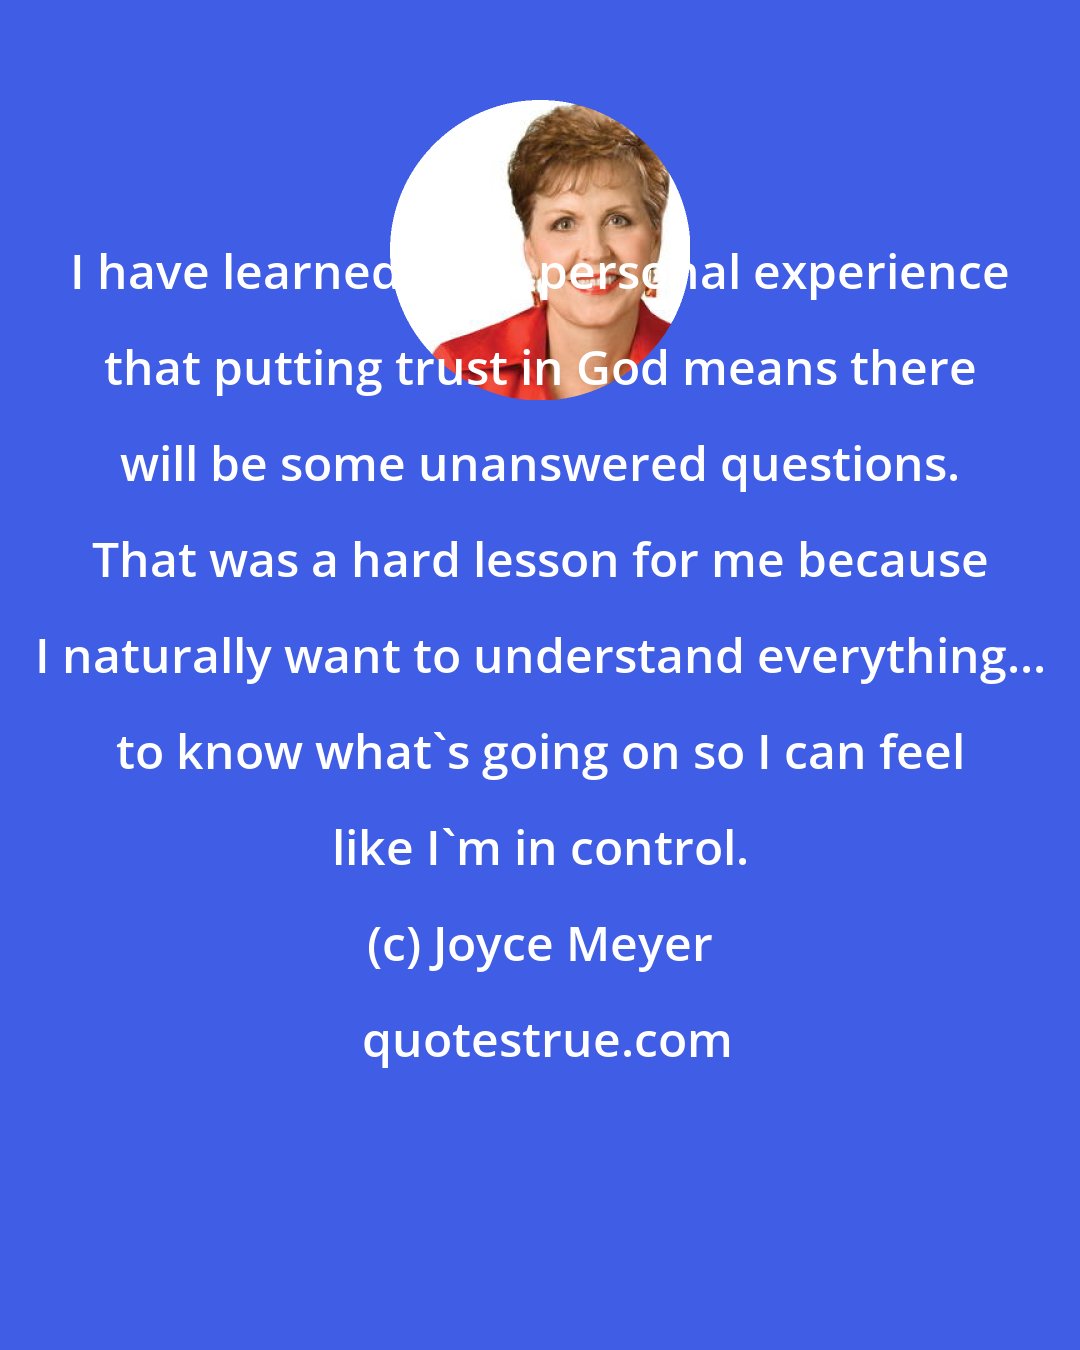 Joyce Meyer: I have learned from personal experience that putting trust in God means there will be some unanswered questions. That was a hard lesson for me because I naturally want to understand everything... to know what's going on so I can feel like I'm in control.